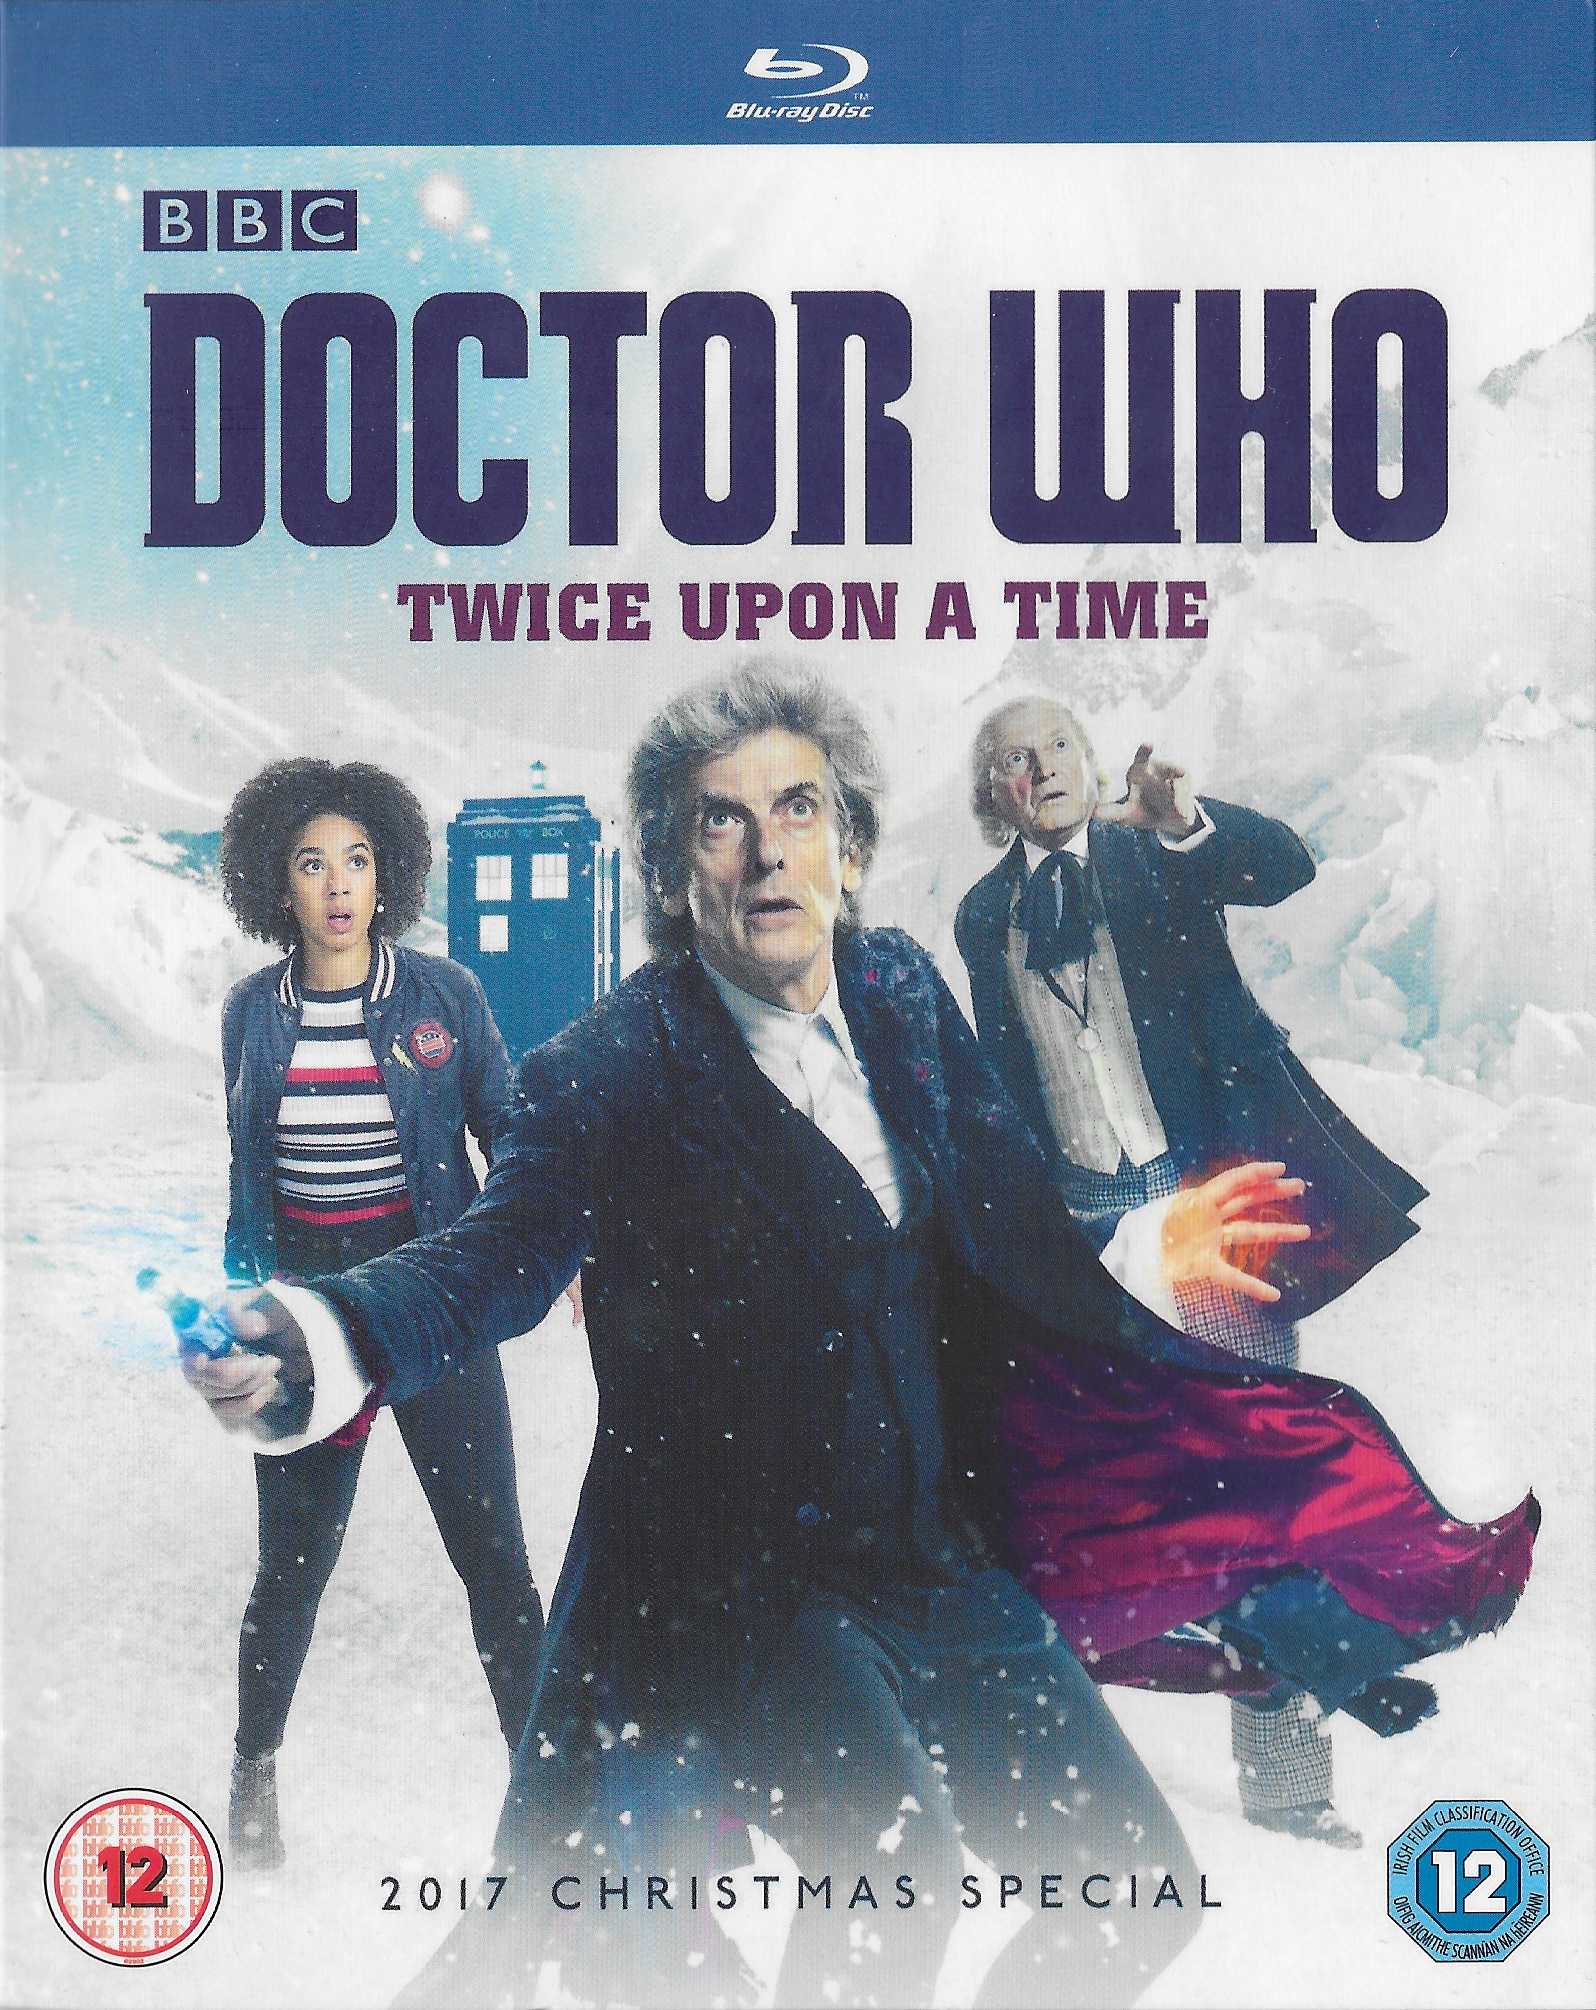 Picture of BBCBD 0423 Doctor Who - Twice upon a time by artist Steven Moffat from the BBC records and Tapes library